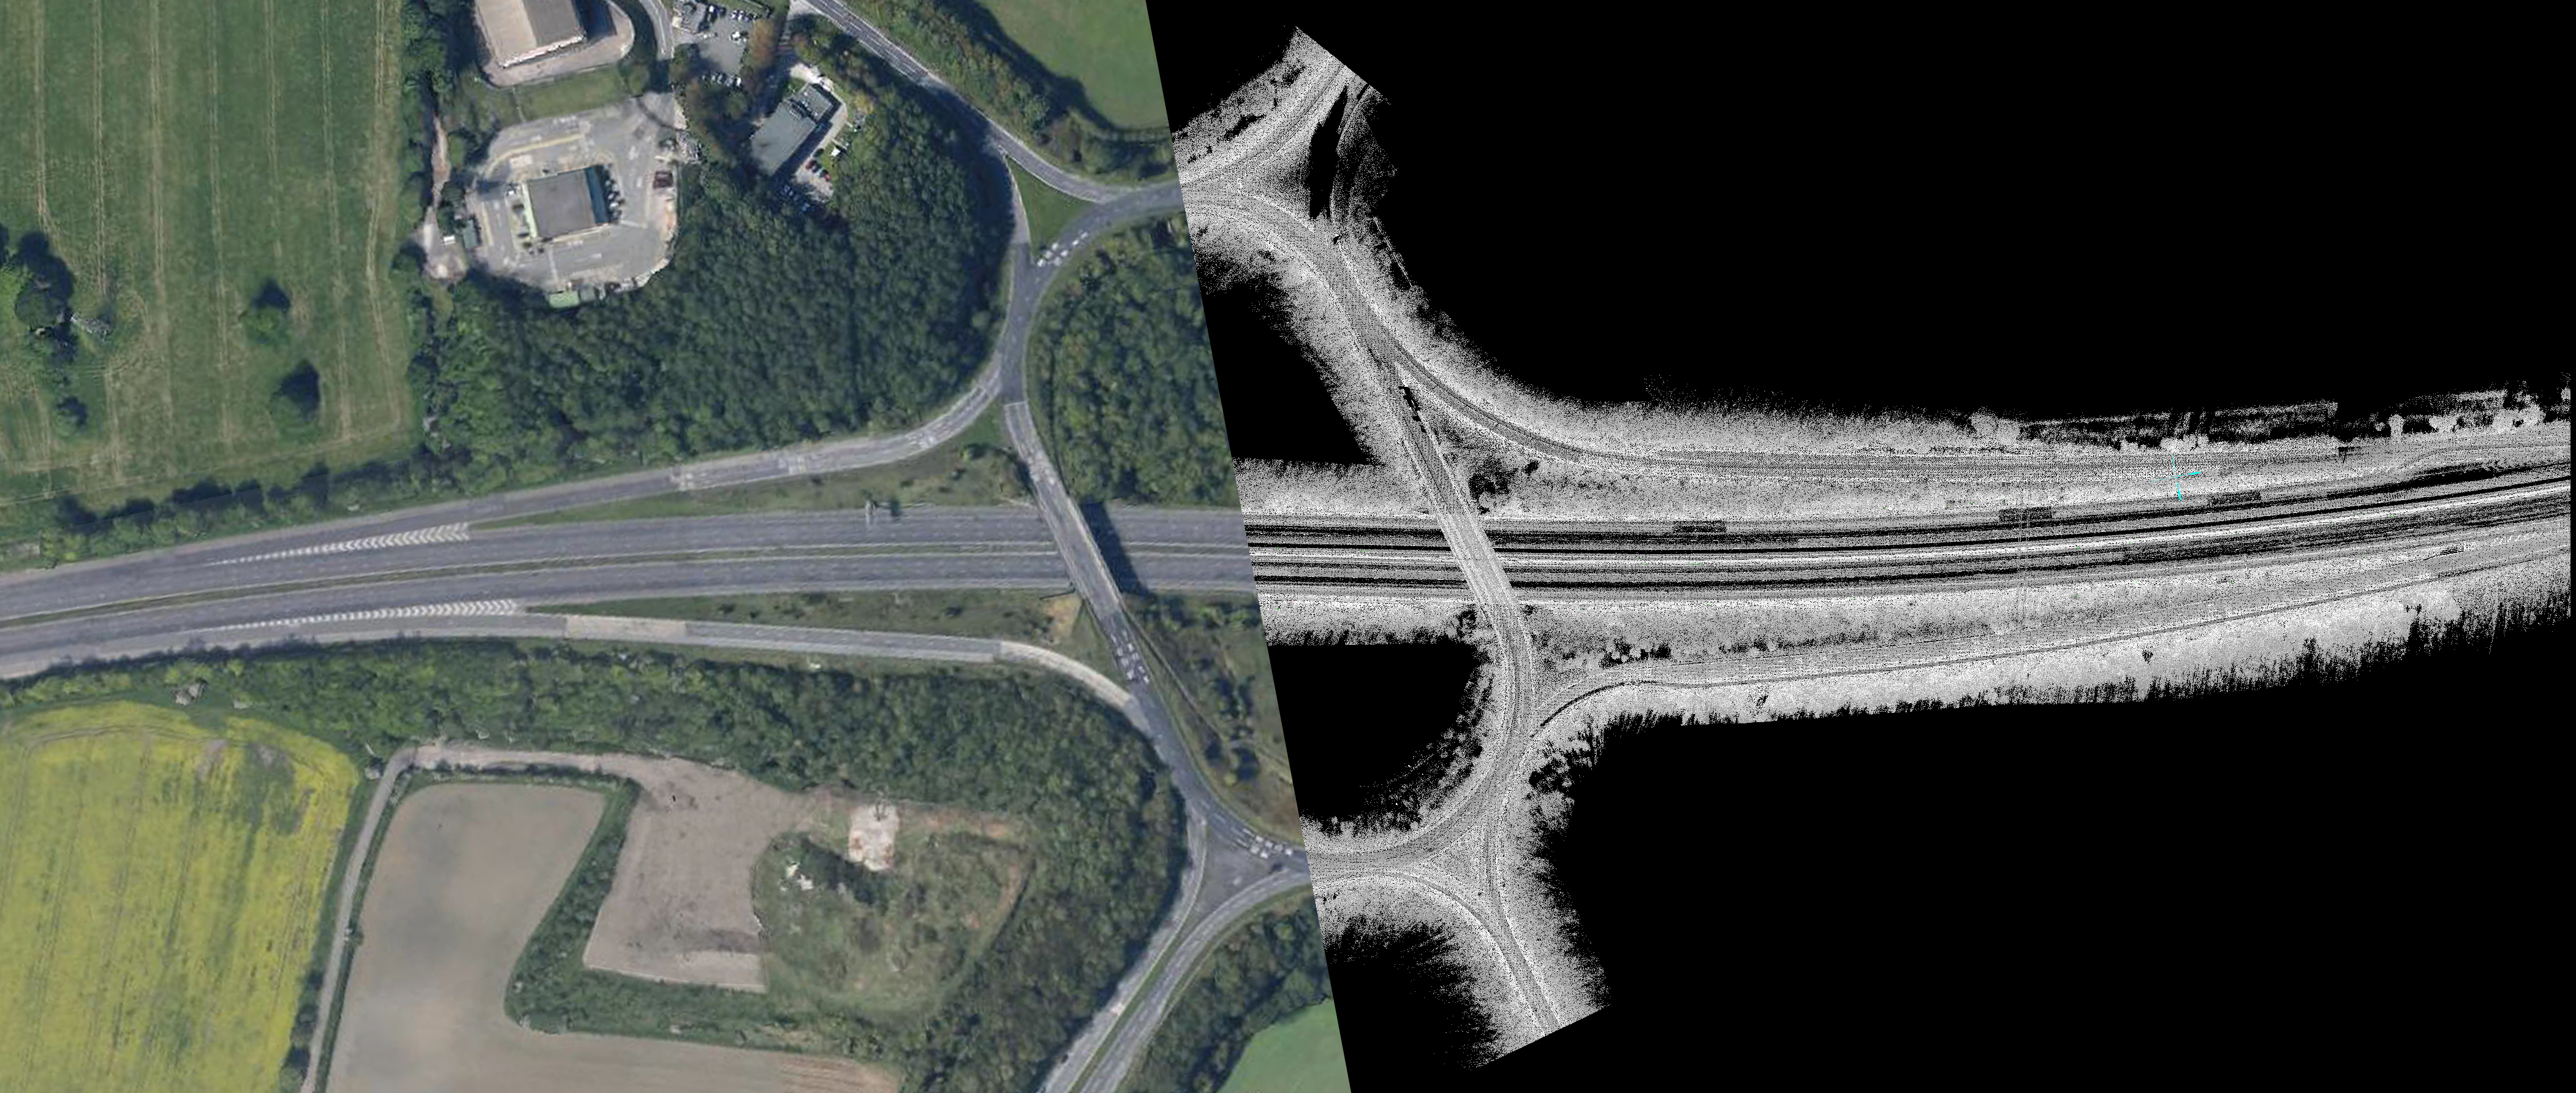 M1 Junction Composite of Aerial Image and Point Cloud